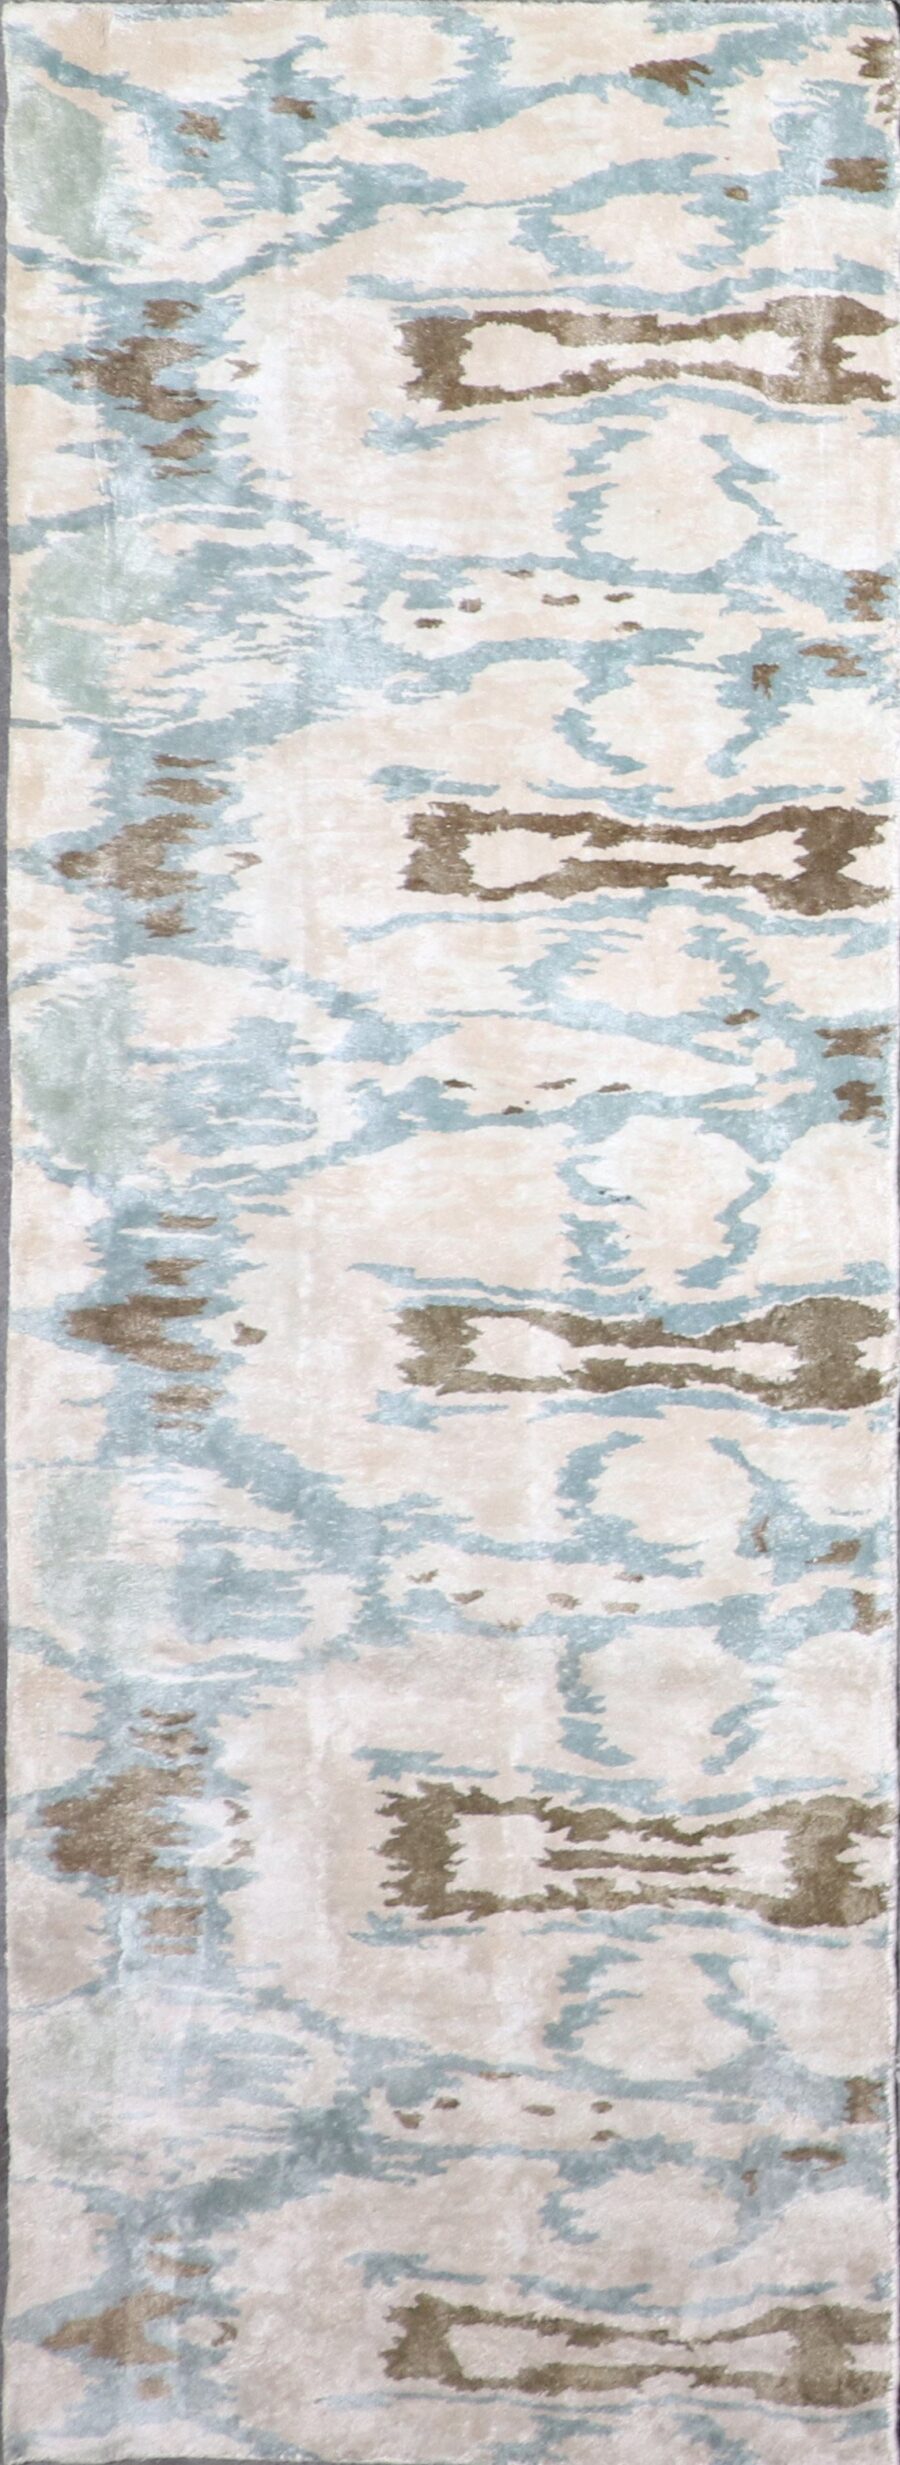 3'2"x8'9" Contemporary Silk Hand-Tufted Rug - Direct Rug Import | Rugs in Chicago, Indiana,South Bend,Granger